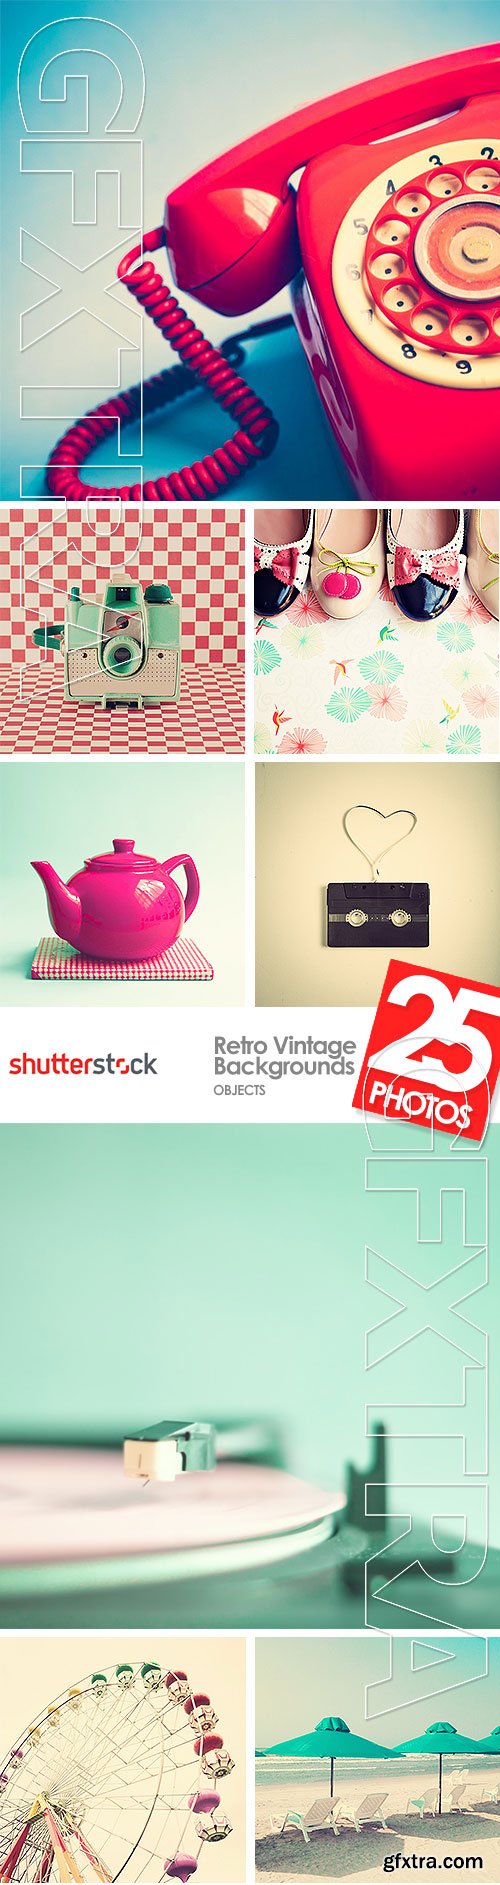 Retro Vintage Backgrounds - Objects 25xJPG